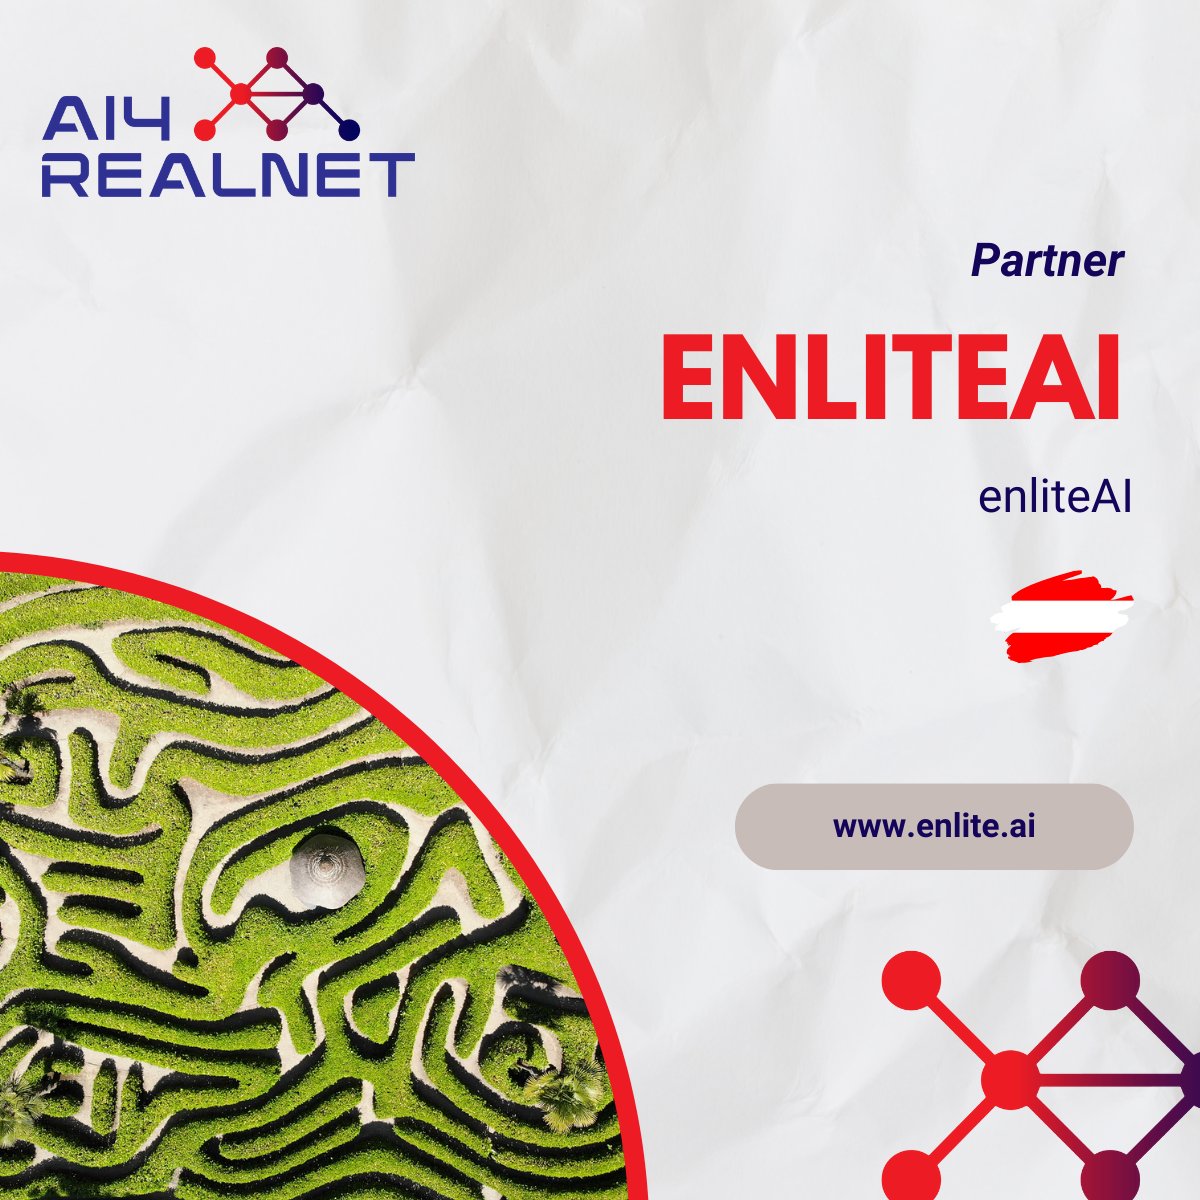 Singly representing 🇦🇹 in the @AI4REALNET consortium is @EnliteAi, a technology provider for Artificial Intelligence specialized in Reinforcement Learning and Computer Vision/geoAI.😲 Find out more here enlite.ai